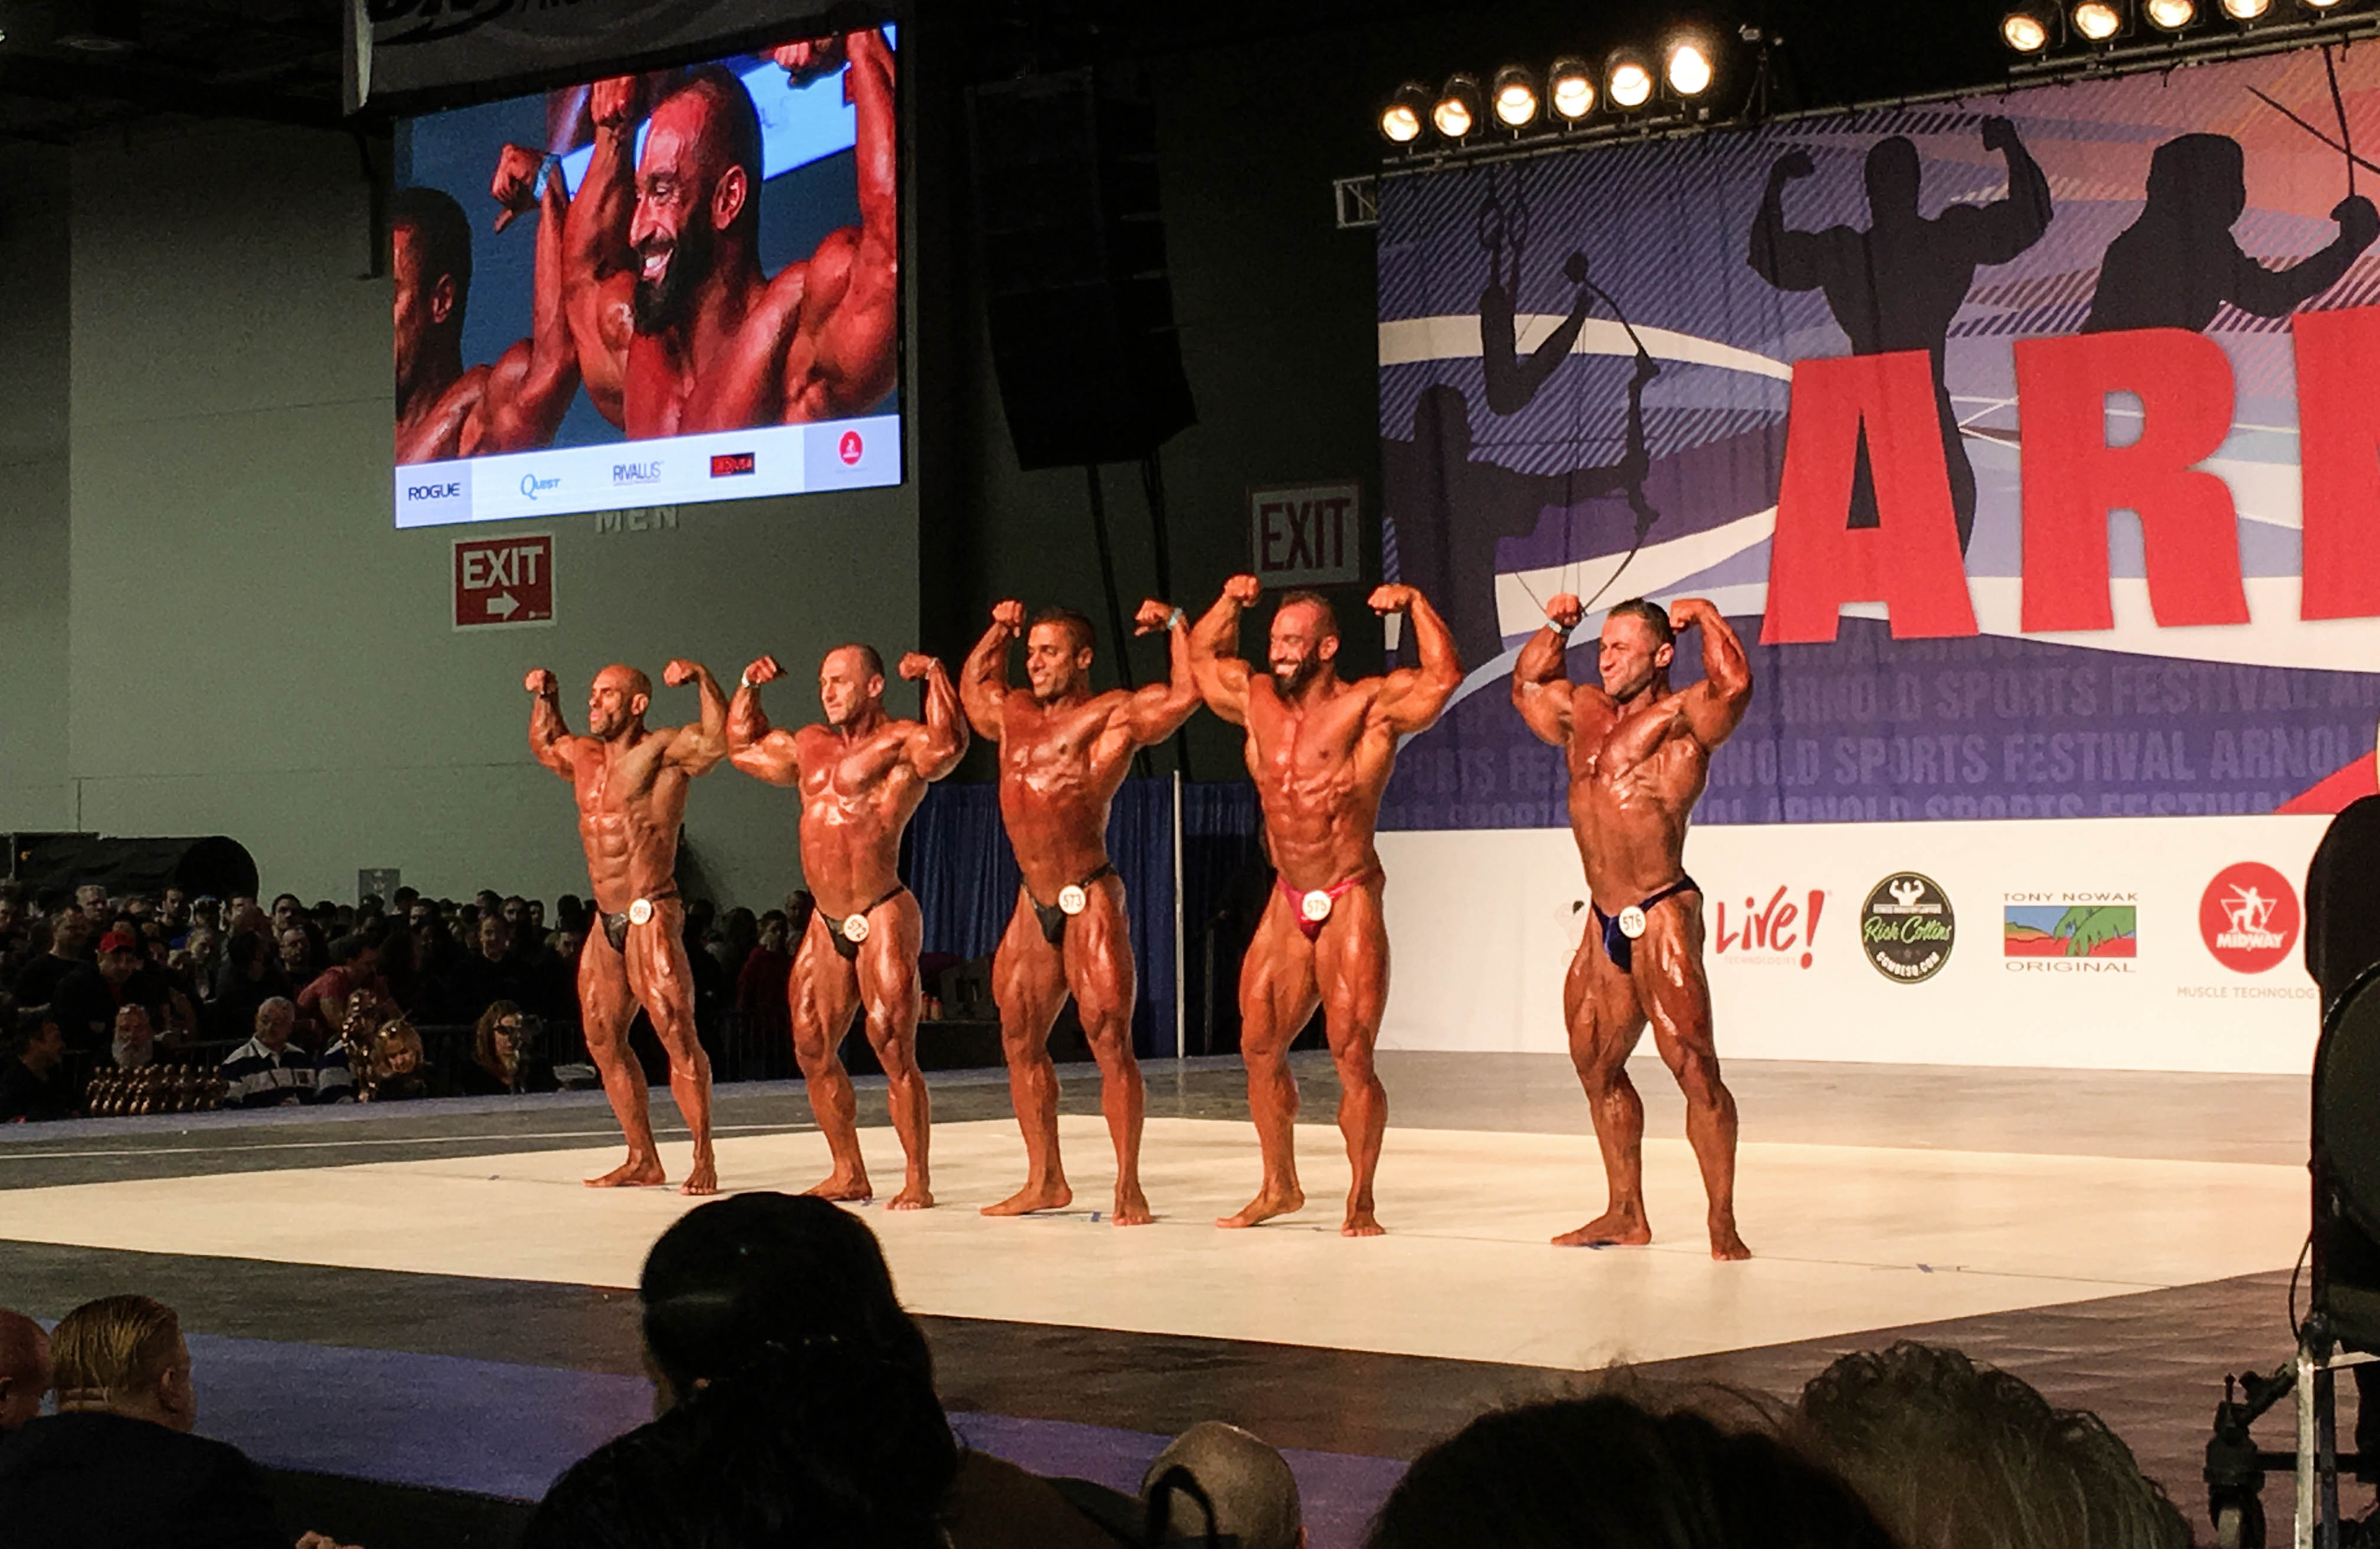 The guys showing off their physiques.